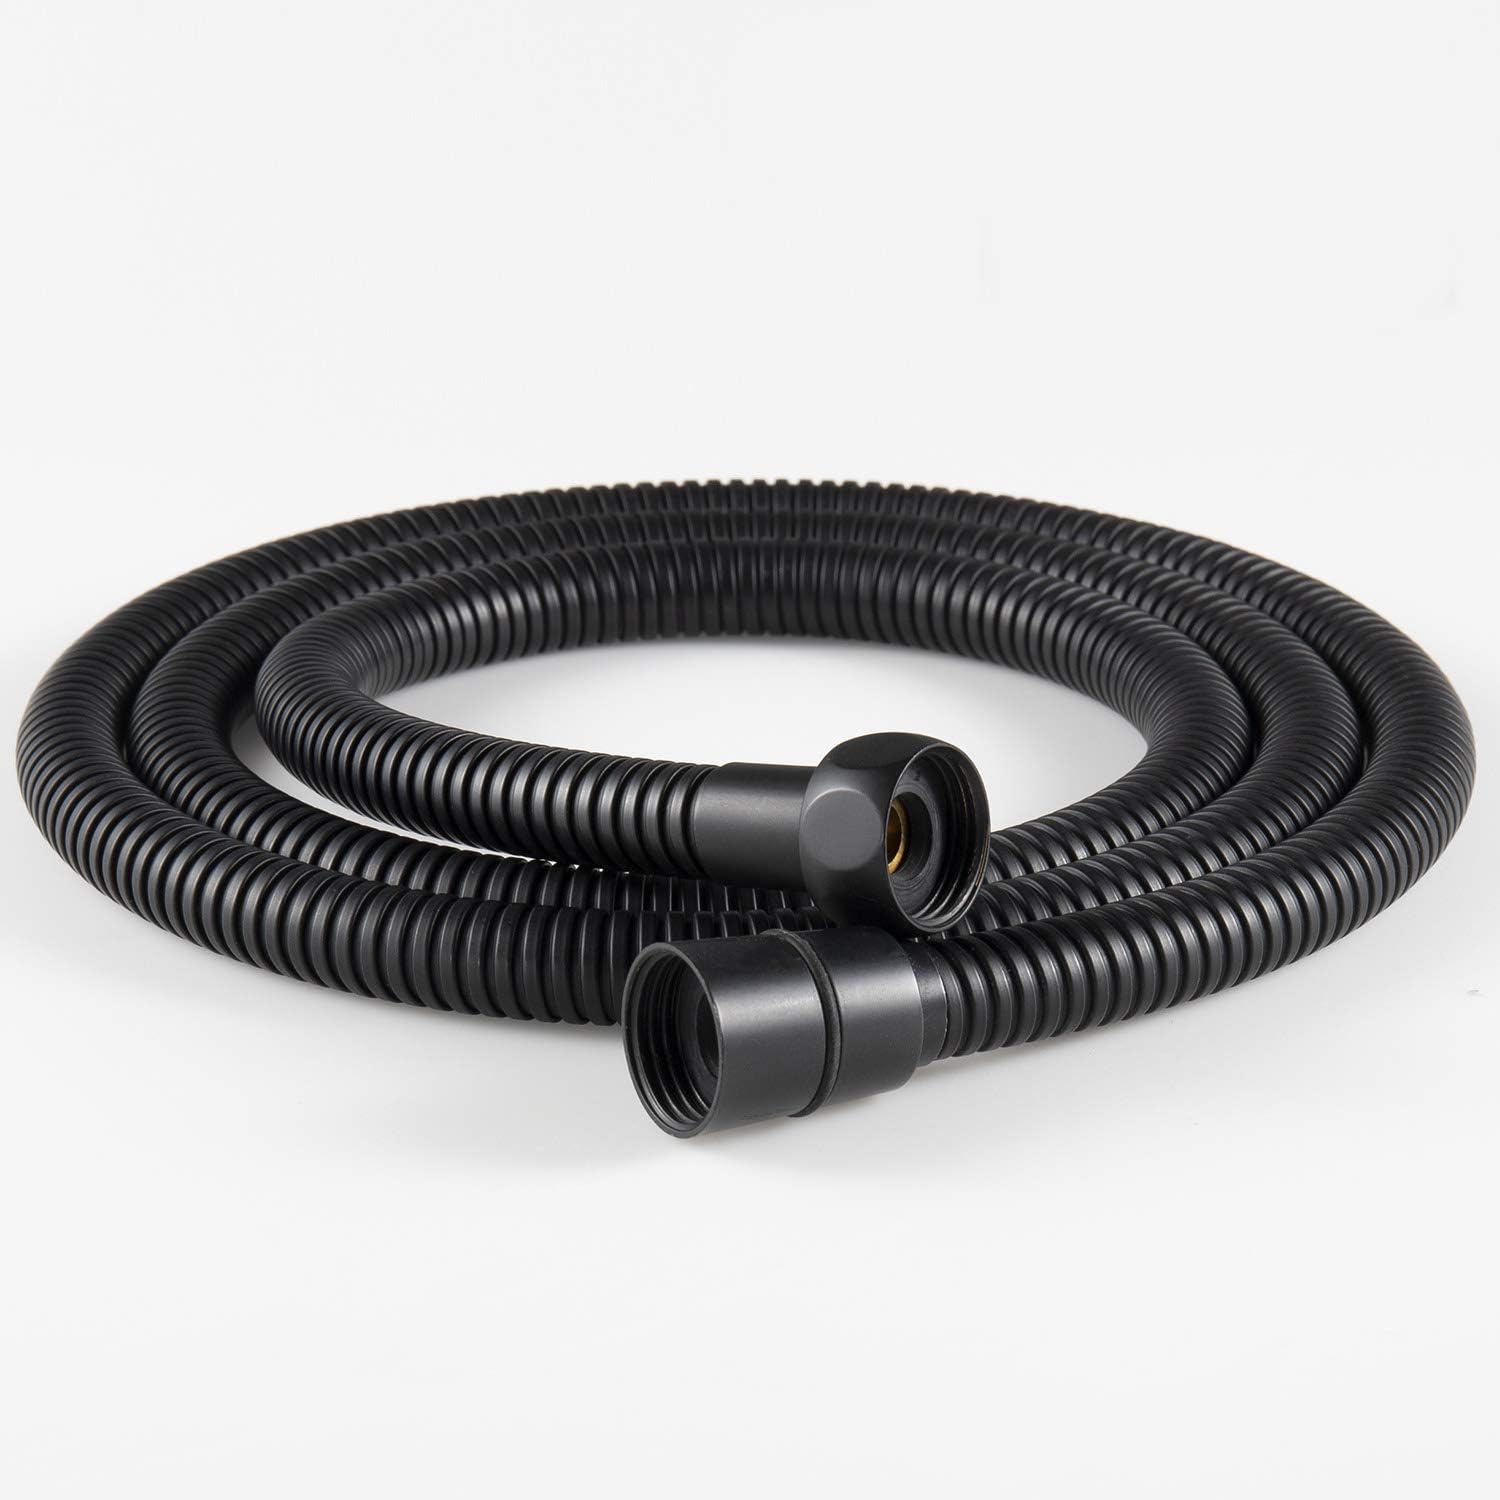 SR SUN RISE Flexible 304 Stainless Steel Replacement Shower Hose with Brass Fittings. RV Shower Hose. Explosion-Proof. 1.8 Meters/5.9 Ft/71 Inches. Matte Black